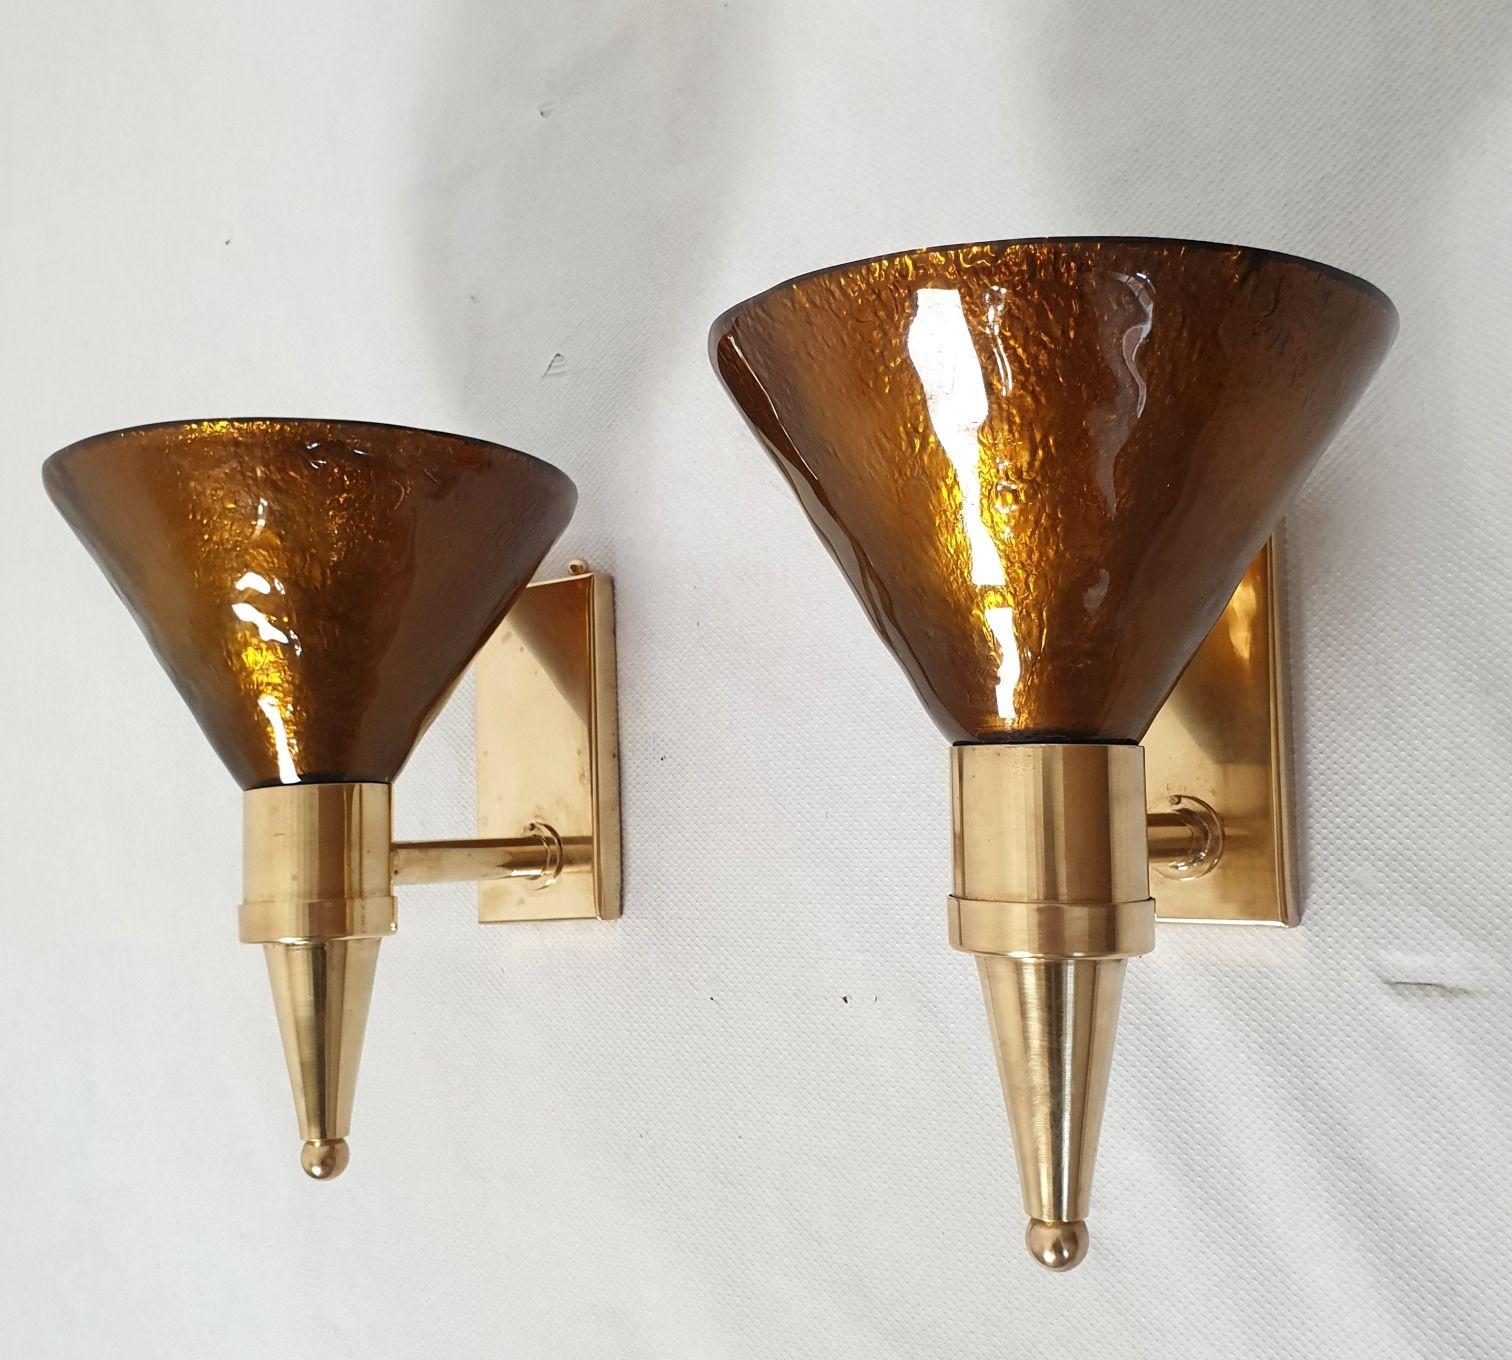 Pair of Mid Century Modern Murano glass and brass sconces, Attributed to Sciolari, Italy 1970s.
The vintage sconces are made of a thick Murano glass cone, nesting the light and brass mounts.
The Murano glass is mirrored, in a warm dark caramel